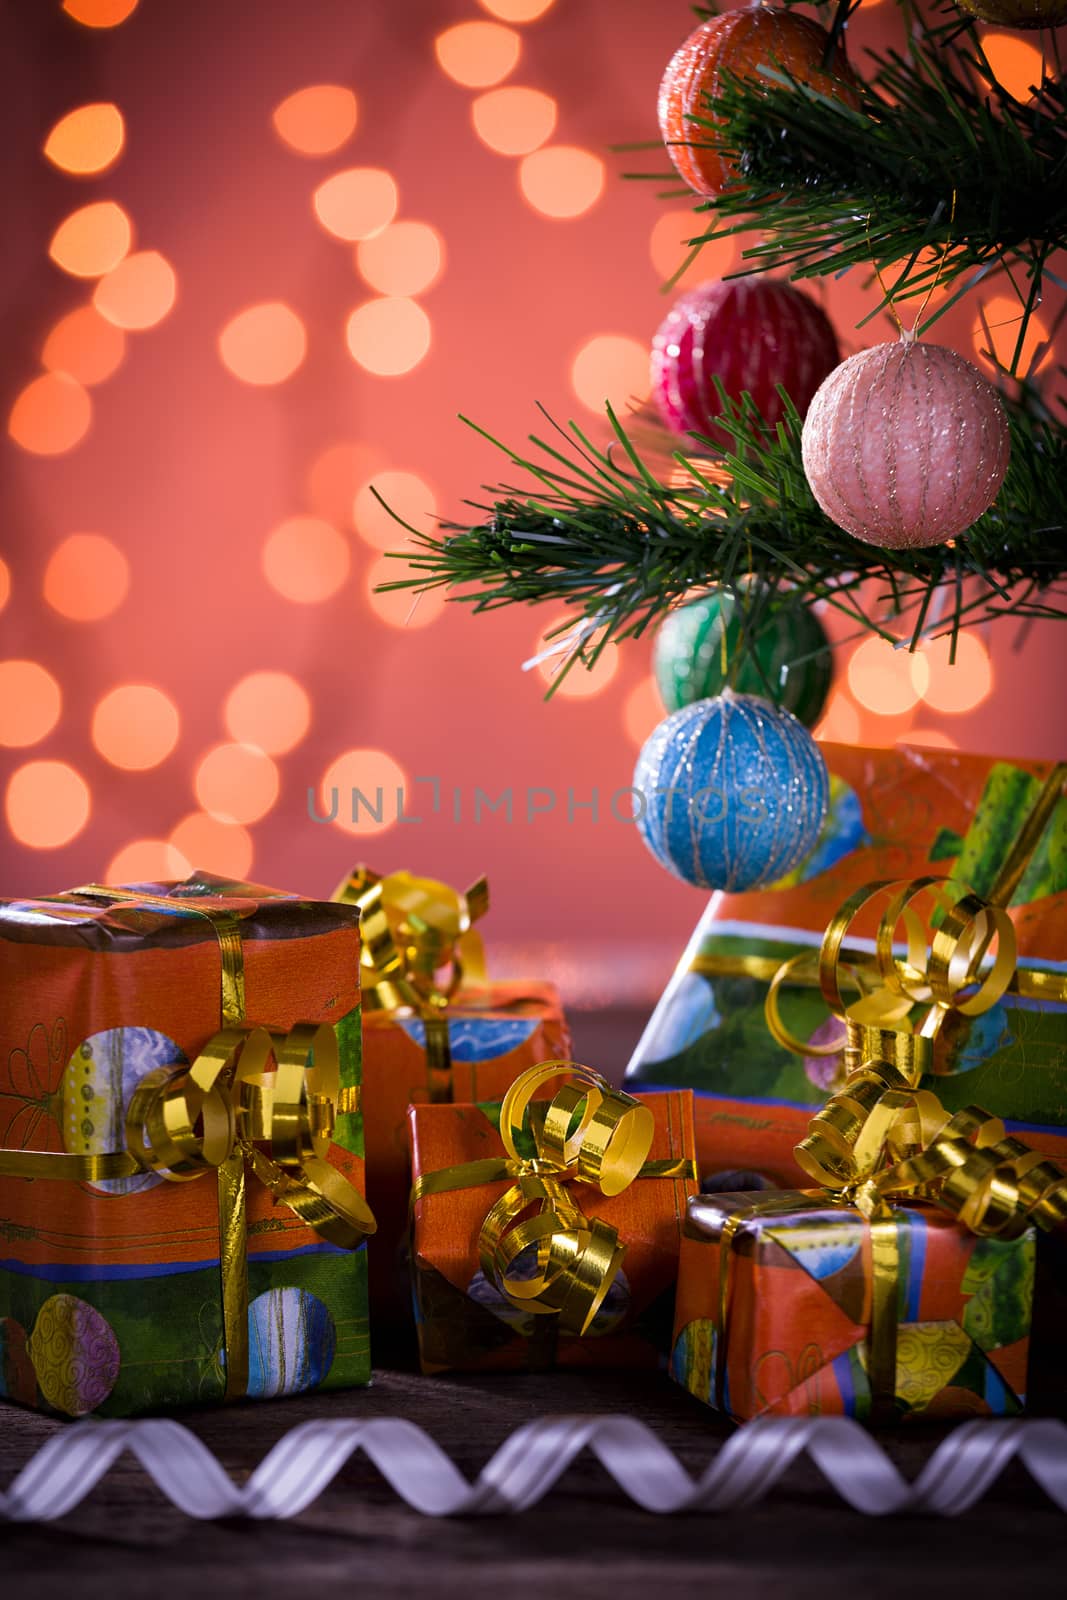 Christmas gifts with blurred lights and ribbon by LuigiMorbidelli